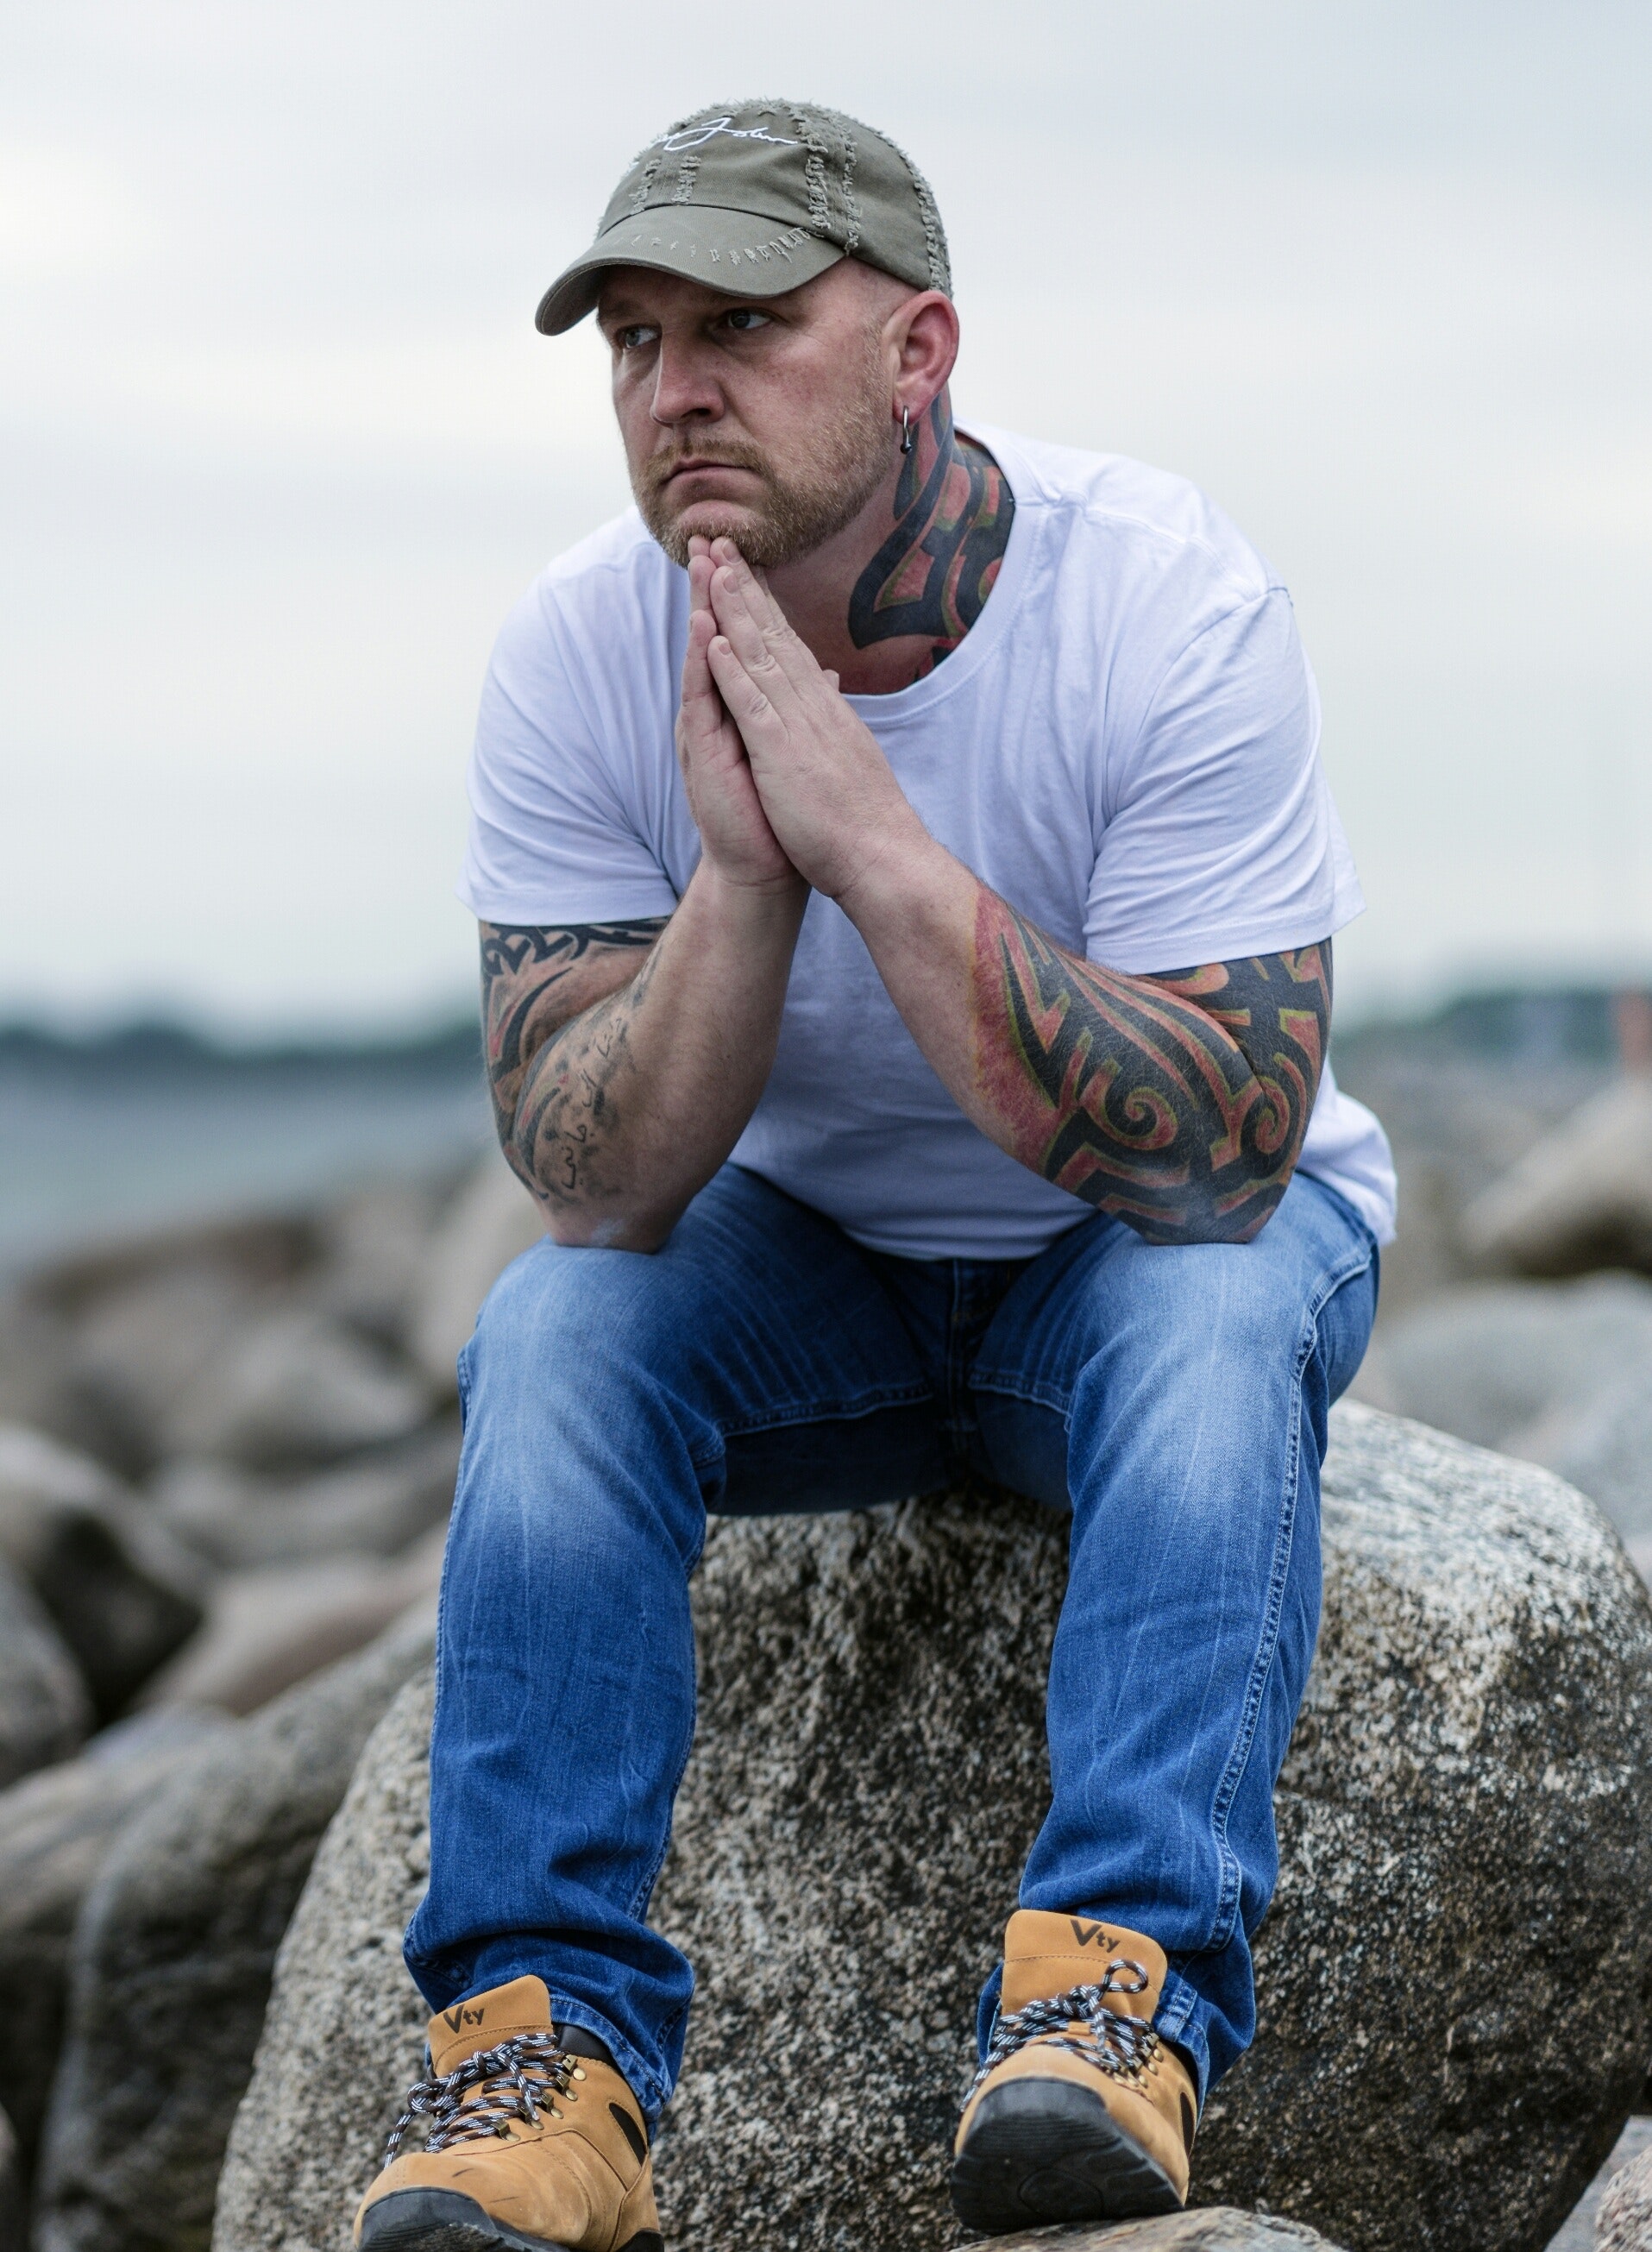 man with tattoos sitting on large rock thinking